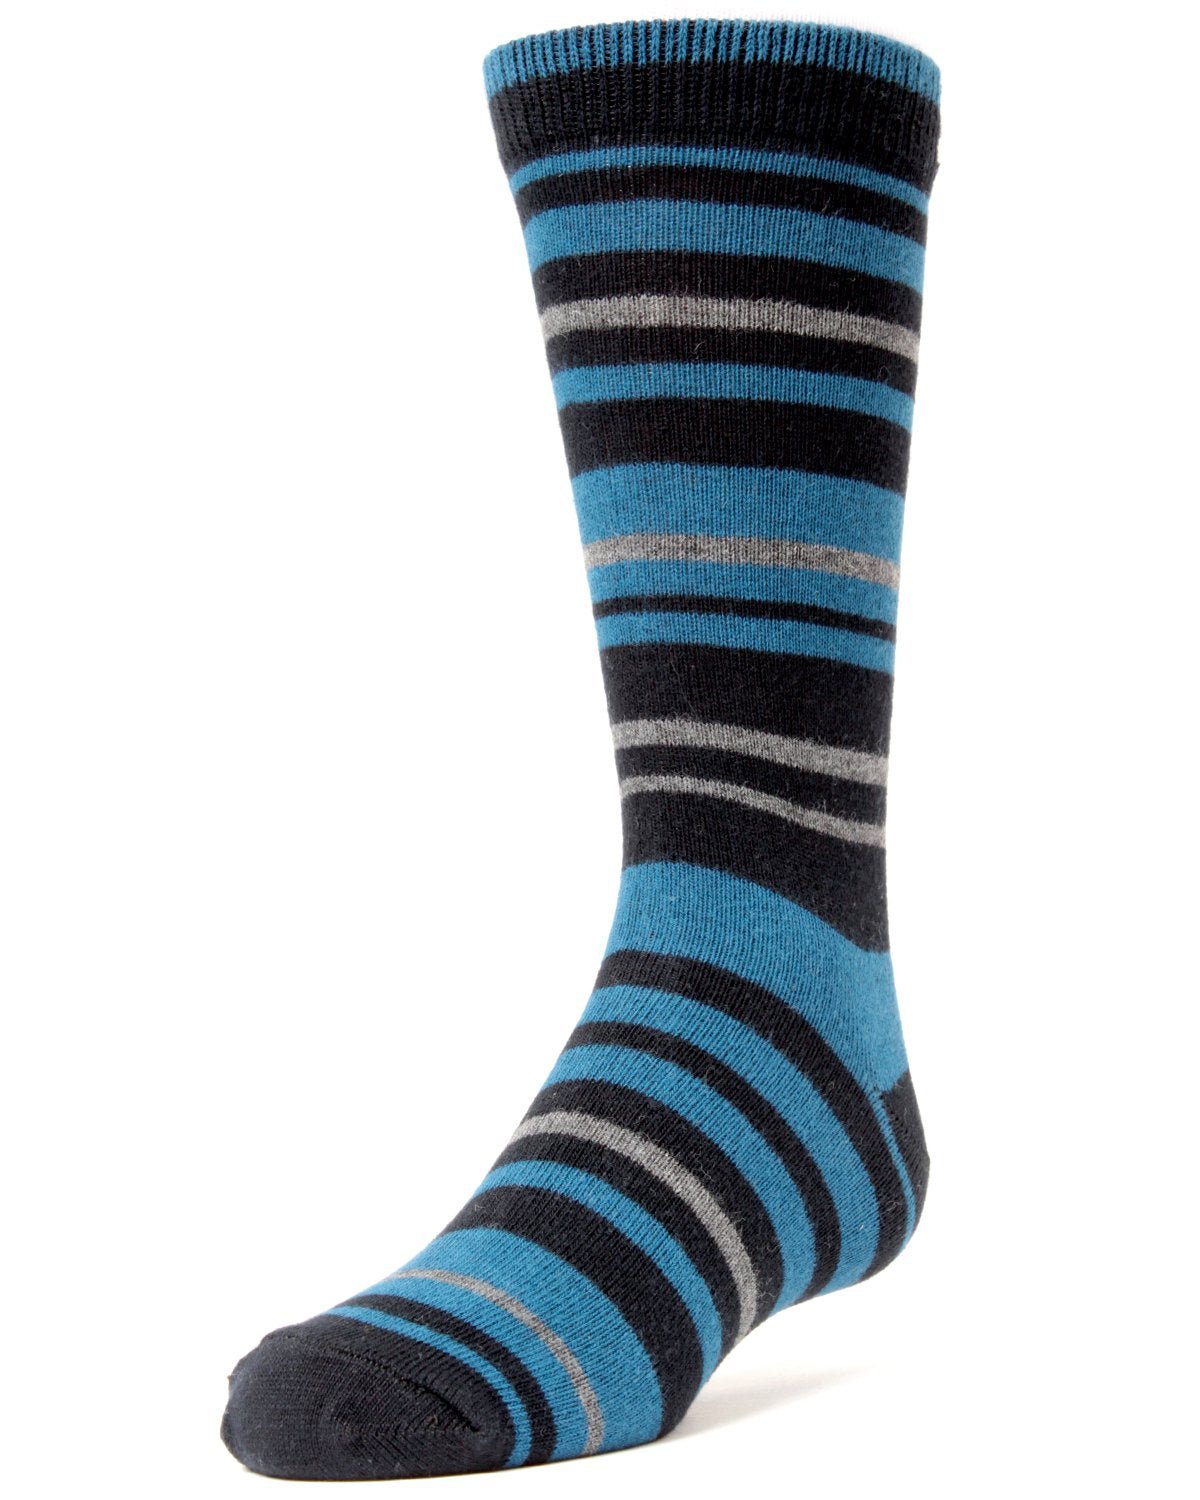 MeMoi Rings and Rungs Cotton Blend Striped Socks - Boys - Male - image 1 of 4